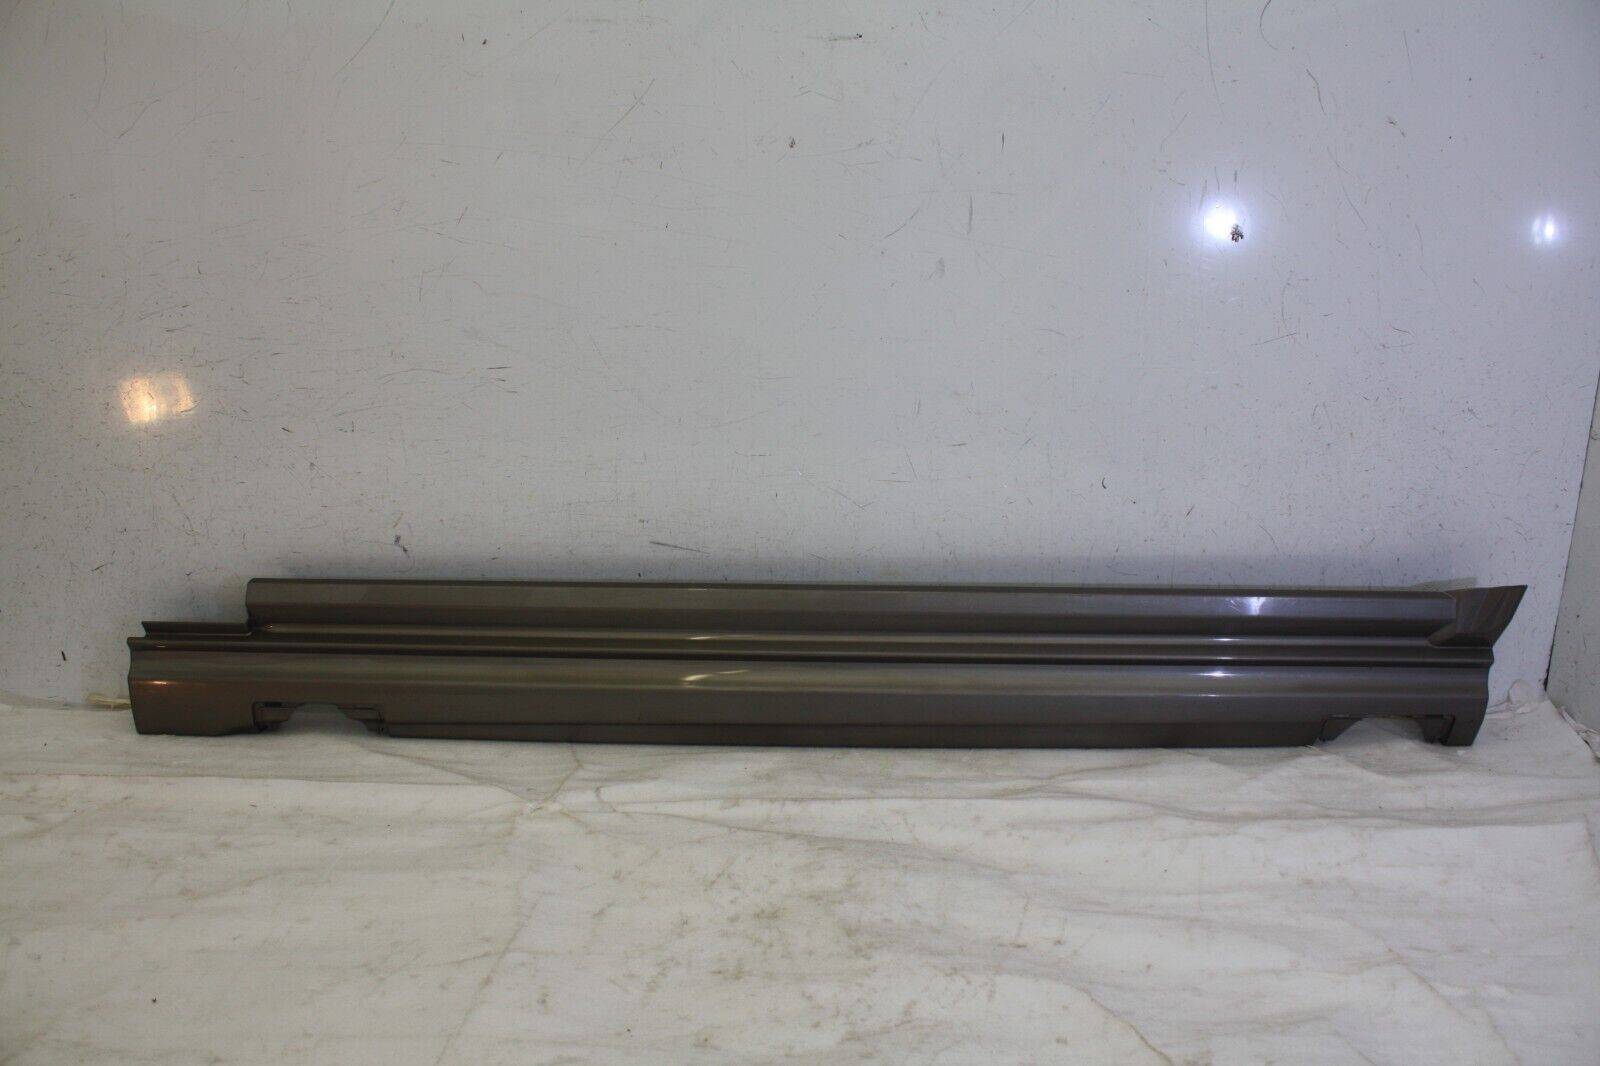 Range Rover Autobiography Left Side Skirt 2009 TO 2012 BH4M 200B09 A Genuine 176217123655